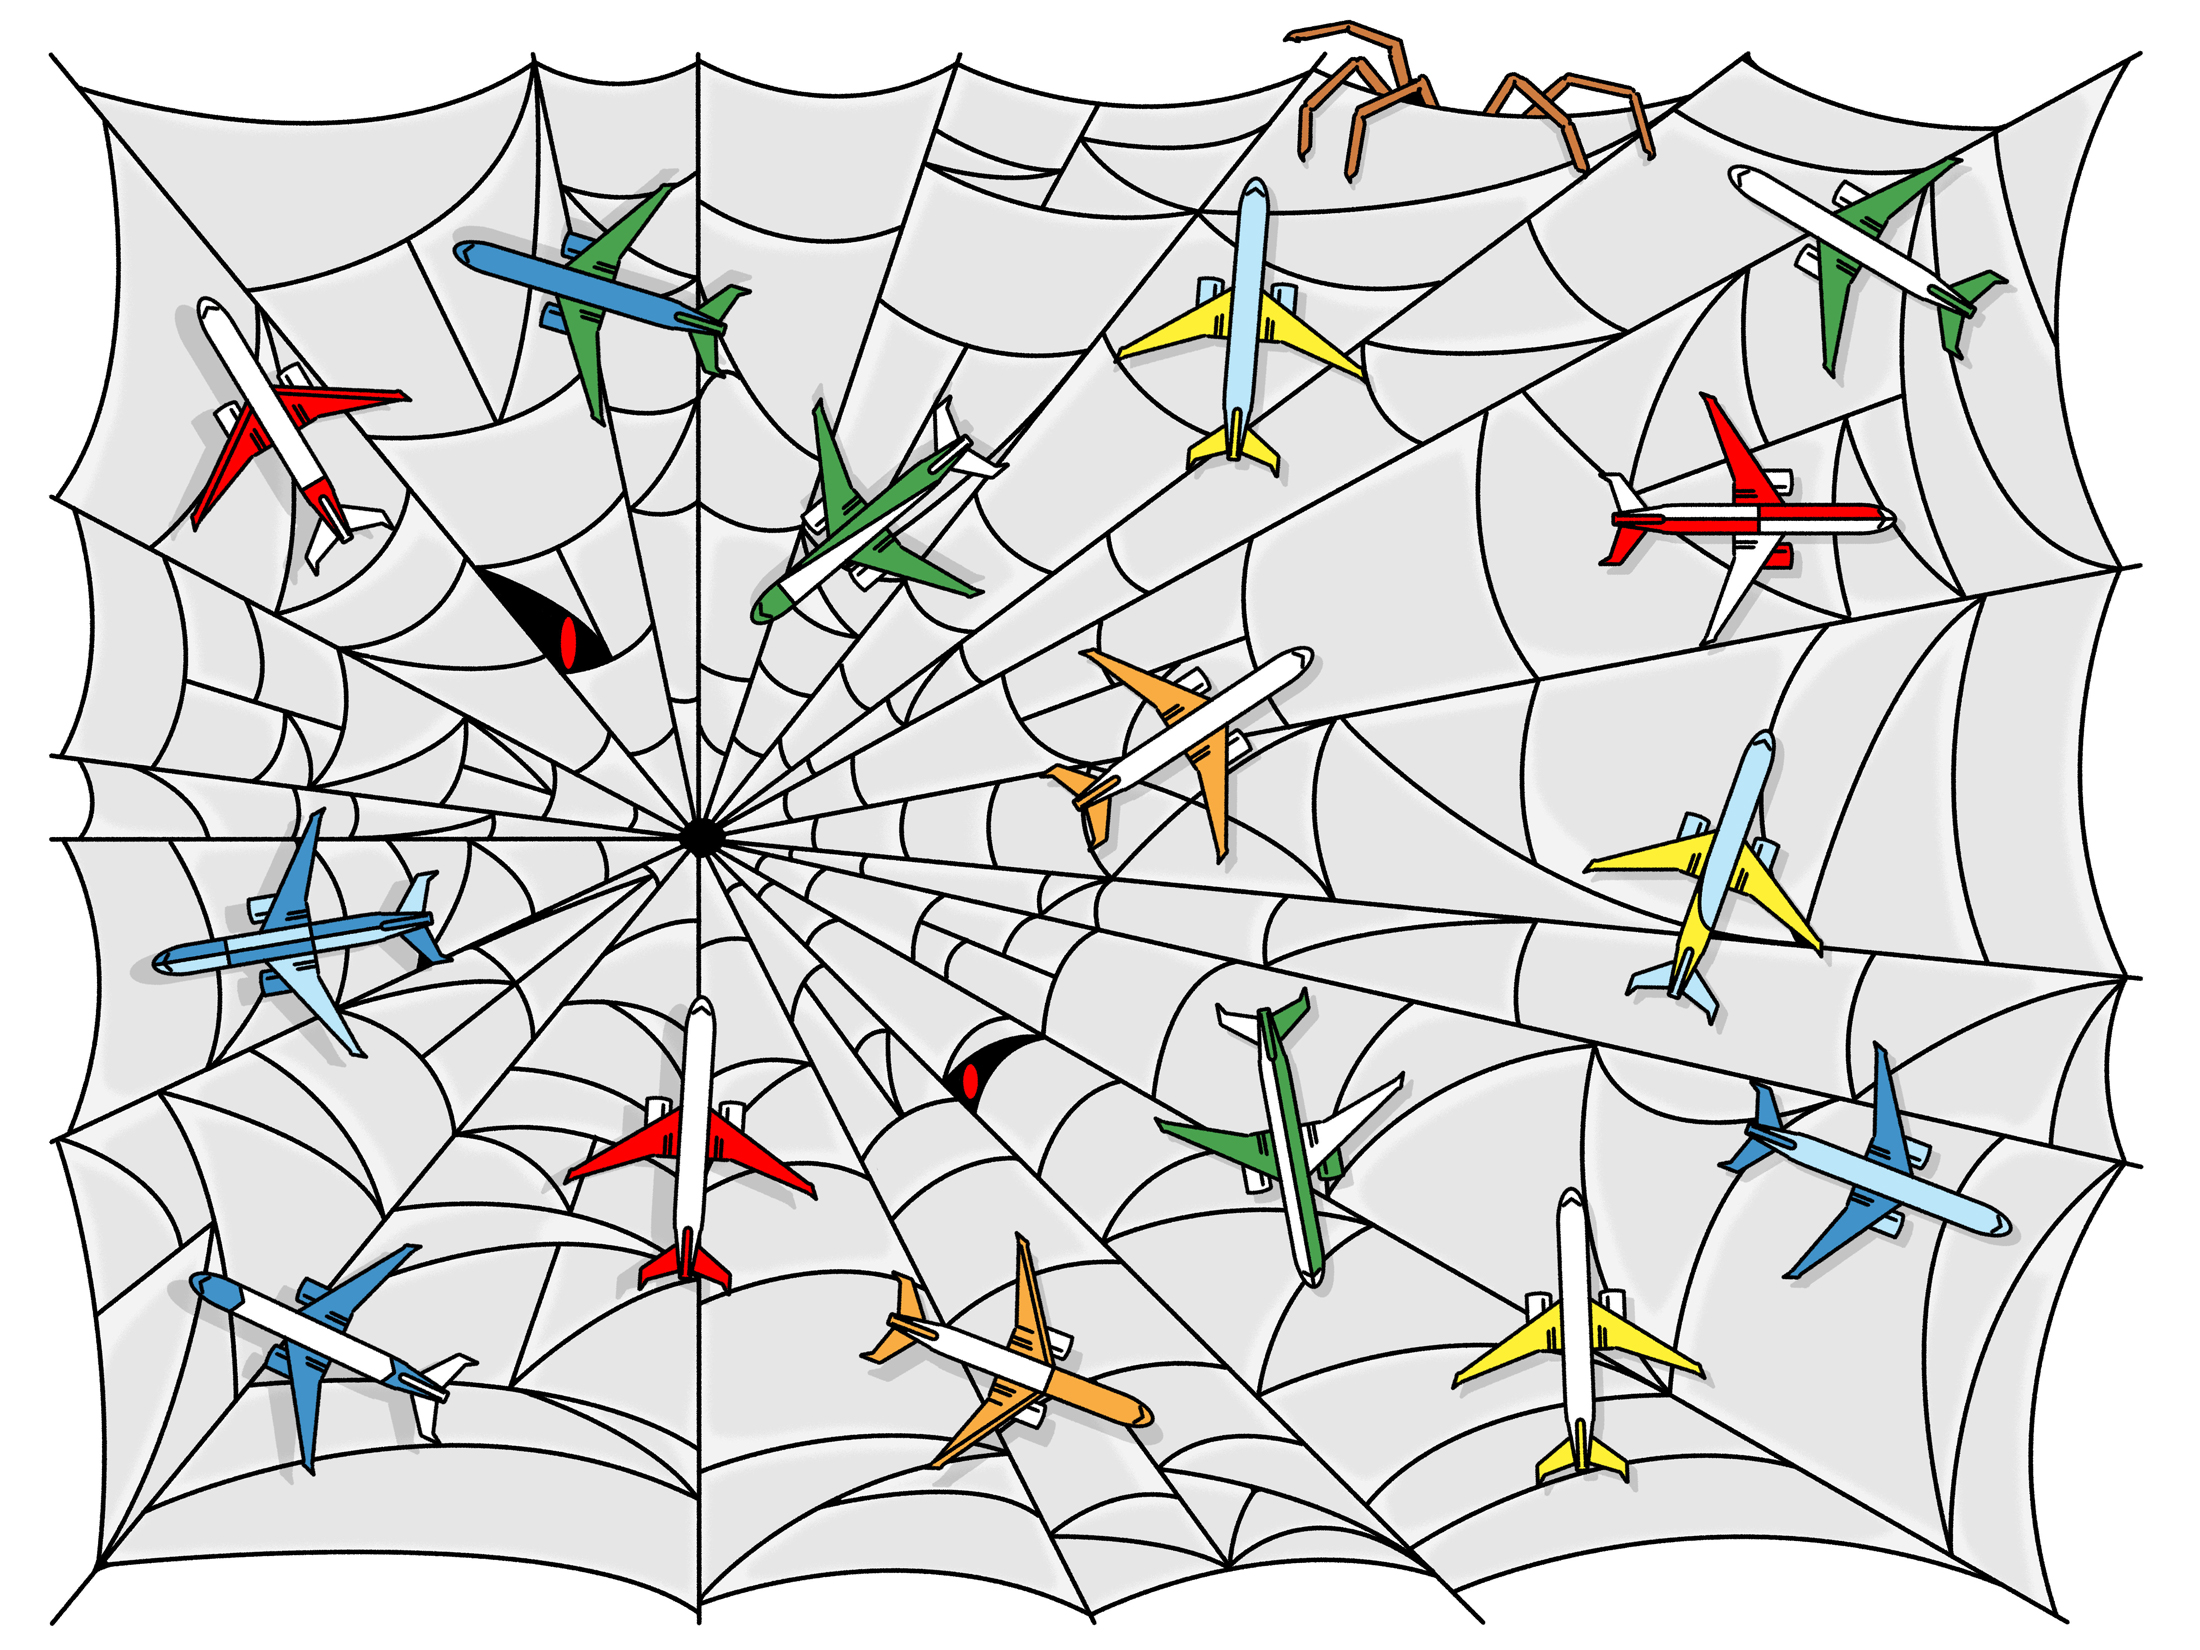 Why sexy, spidery cobweb fashion is going to be everywhere post-pandemic